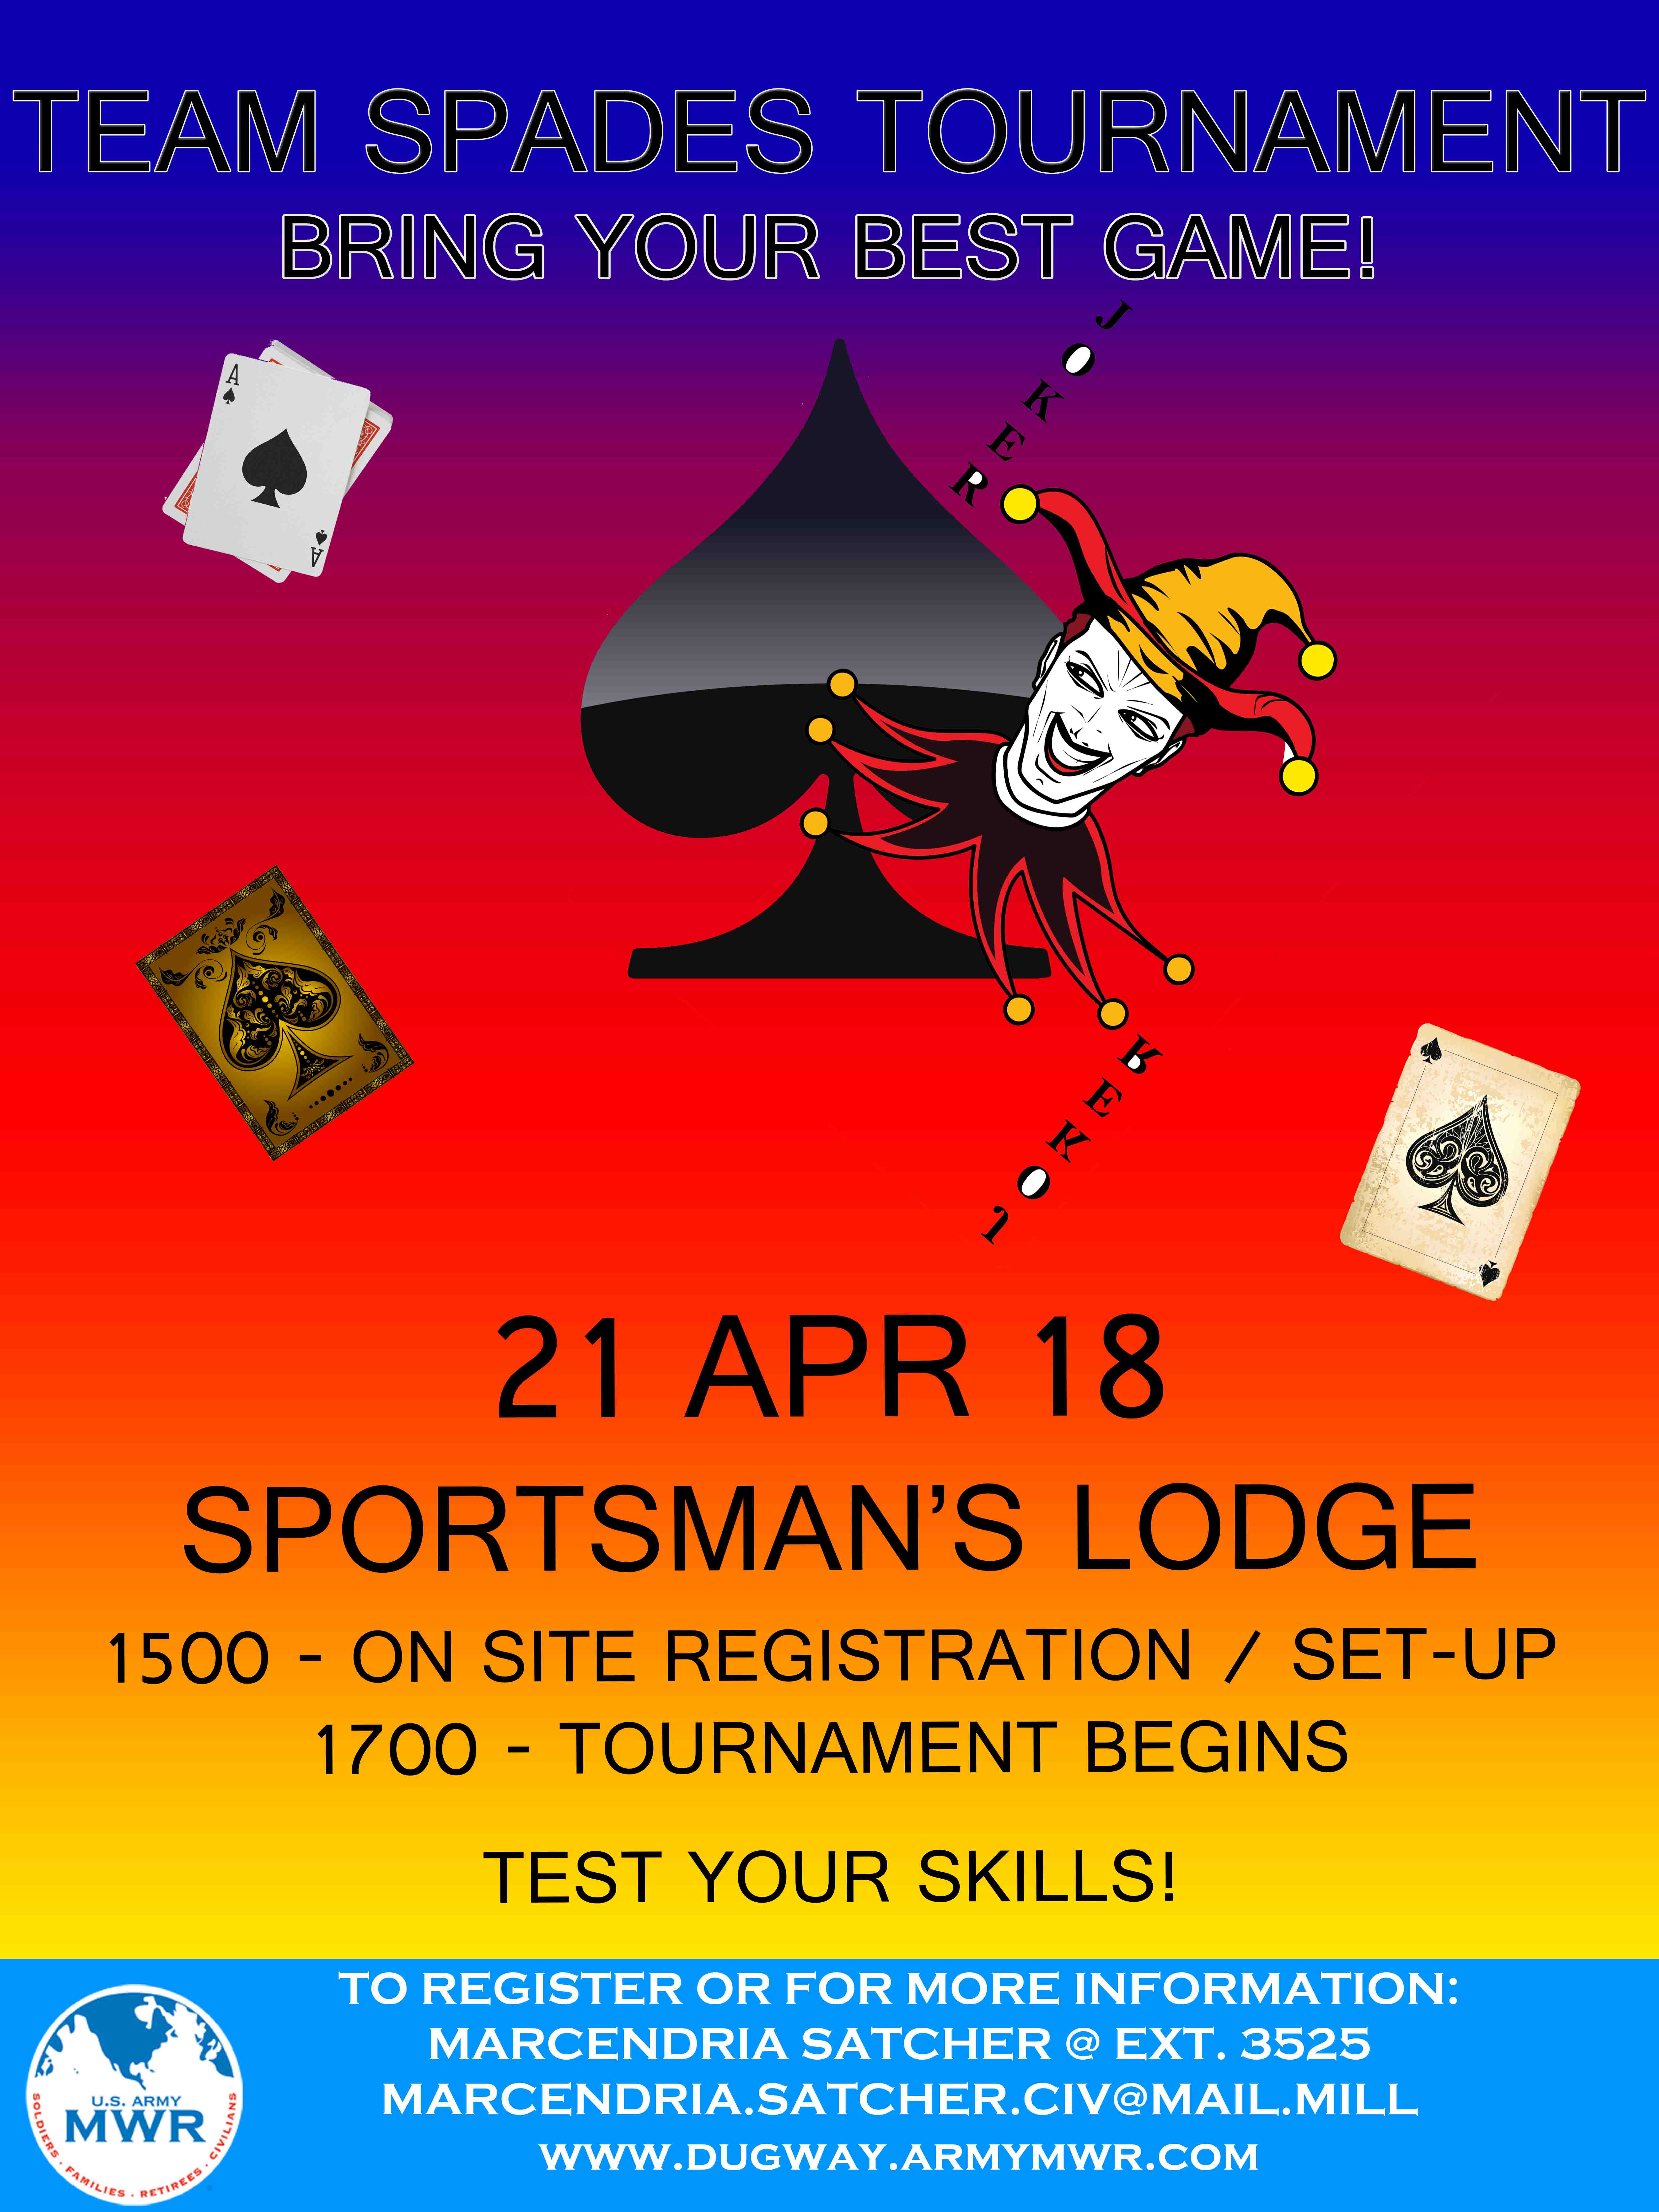 View Event Team Spades Tournament Dugway Proving Ground US